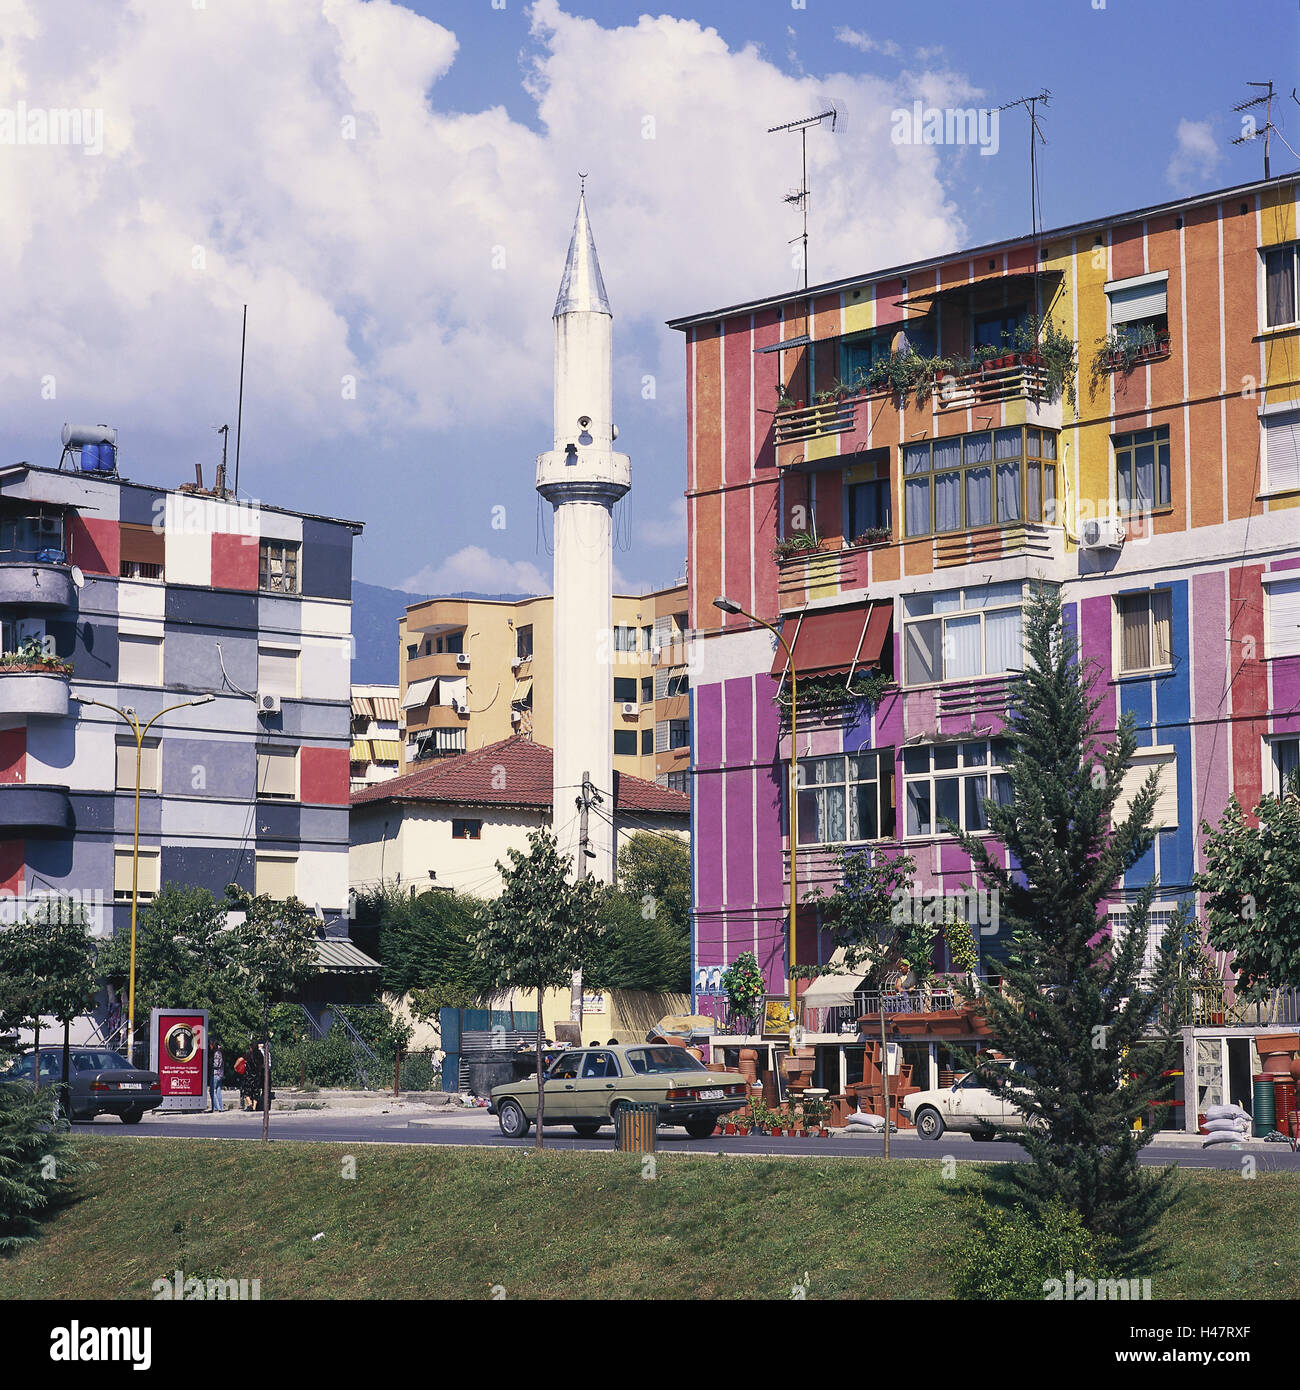 Albania, Tirana, Skanderbeg space, residential houses, mosque, minaret, traffic, Balkan Peninsula, capital, space, houses, house facades, colourfully, brightly, of different colour, place of interest, destination, tourism, Stock Photo